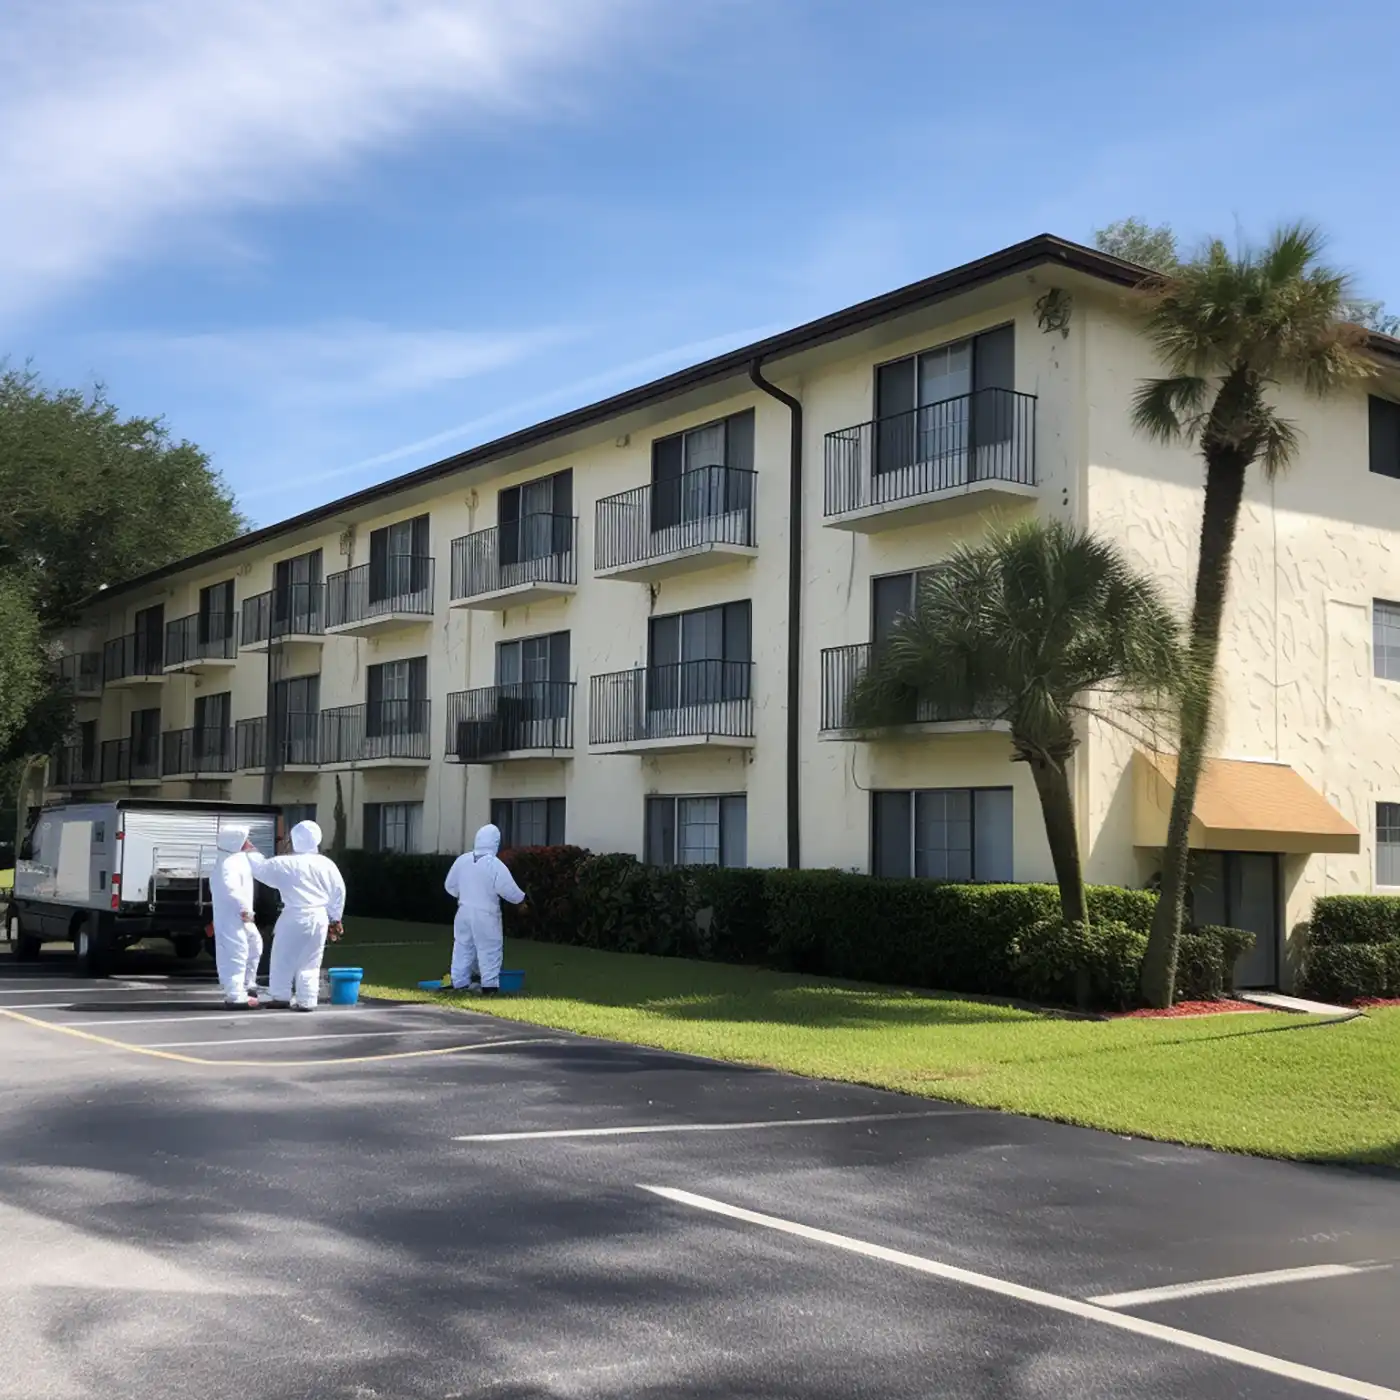 An apartment complex being treated for bed bugs by pest exterminators.